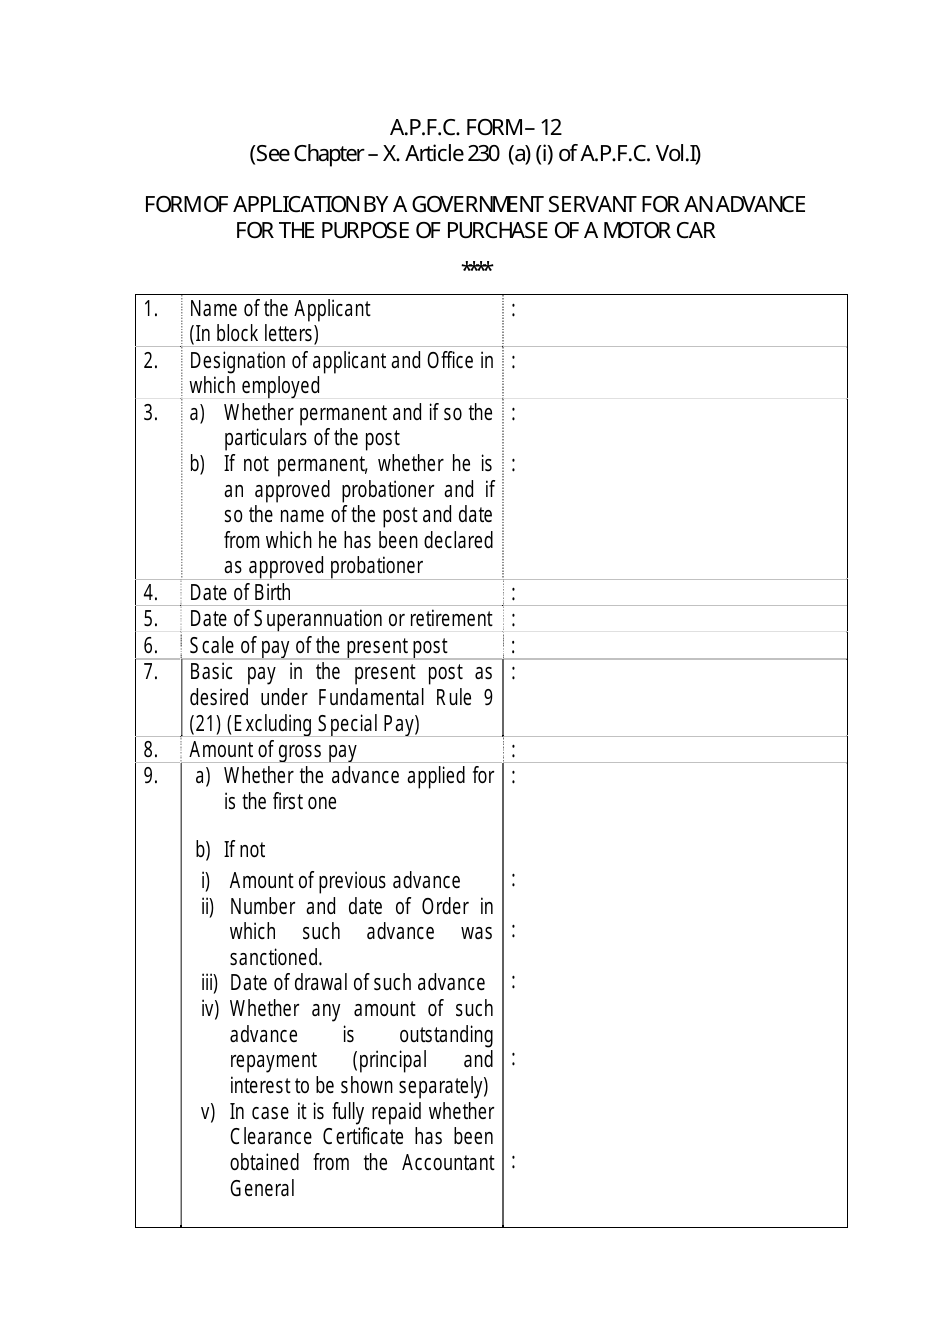 A.P.F.C. Form 12 Form of Application by a Government Servant for an Advance for the Purpose of Purchase of a Motor Car - India, Page 1